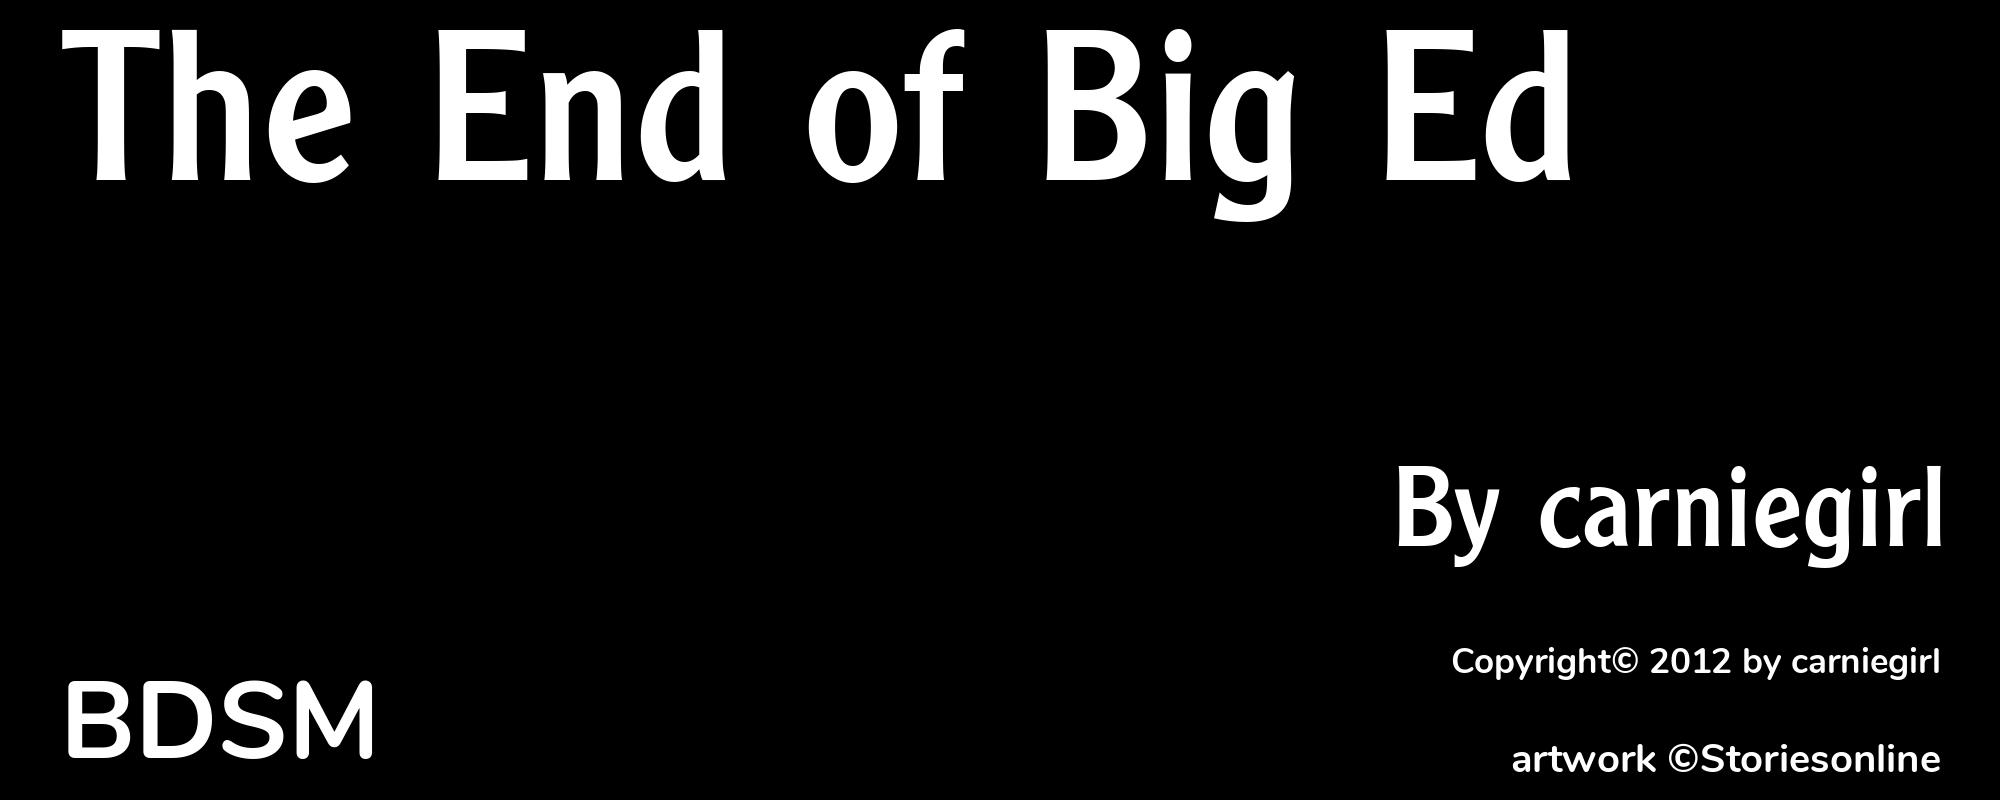 The End of Big Ed - Cover